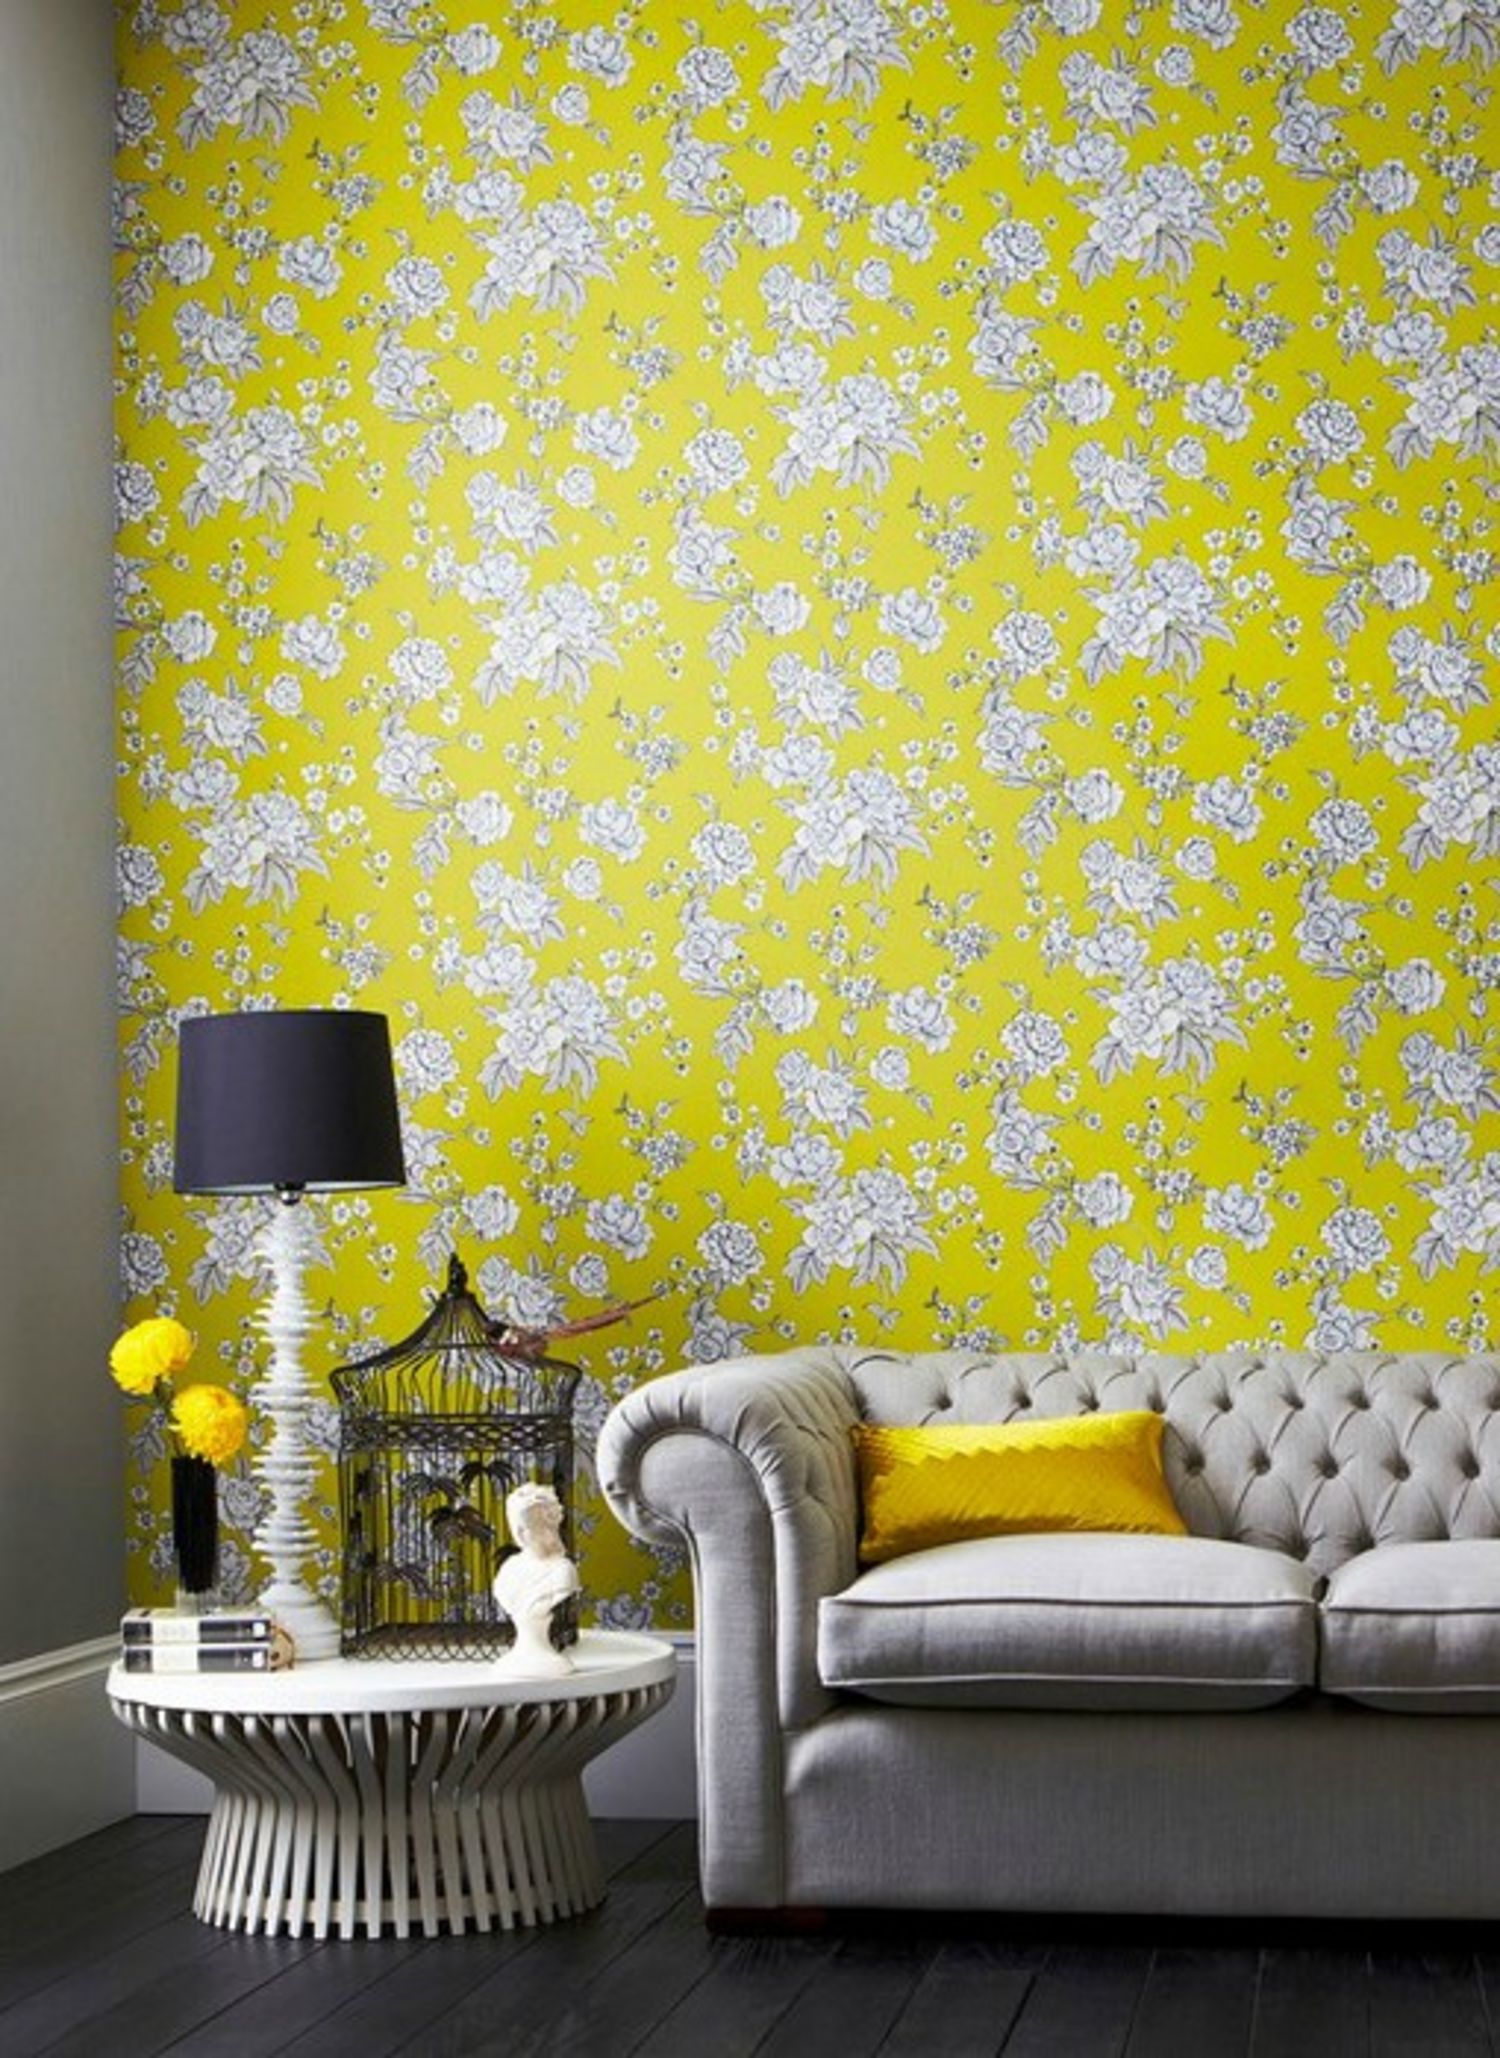 wallpaper for walls images,yellow,wallpaper,wall,green,room